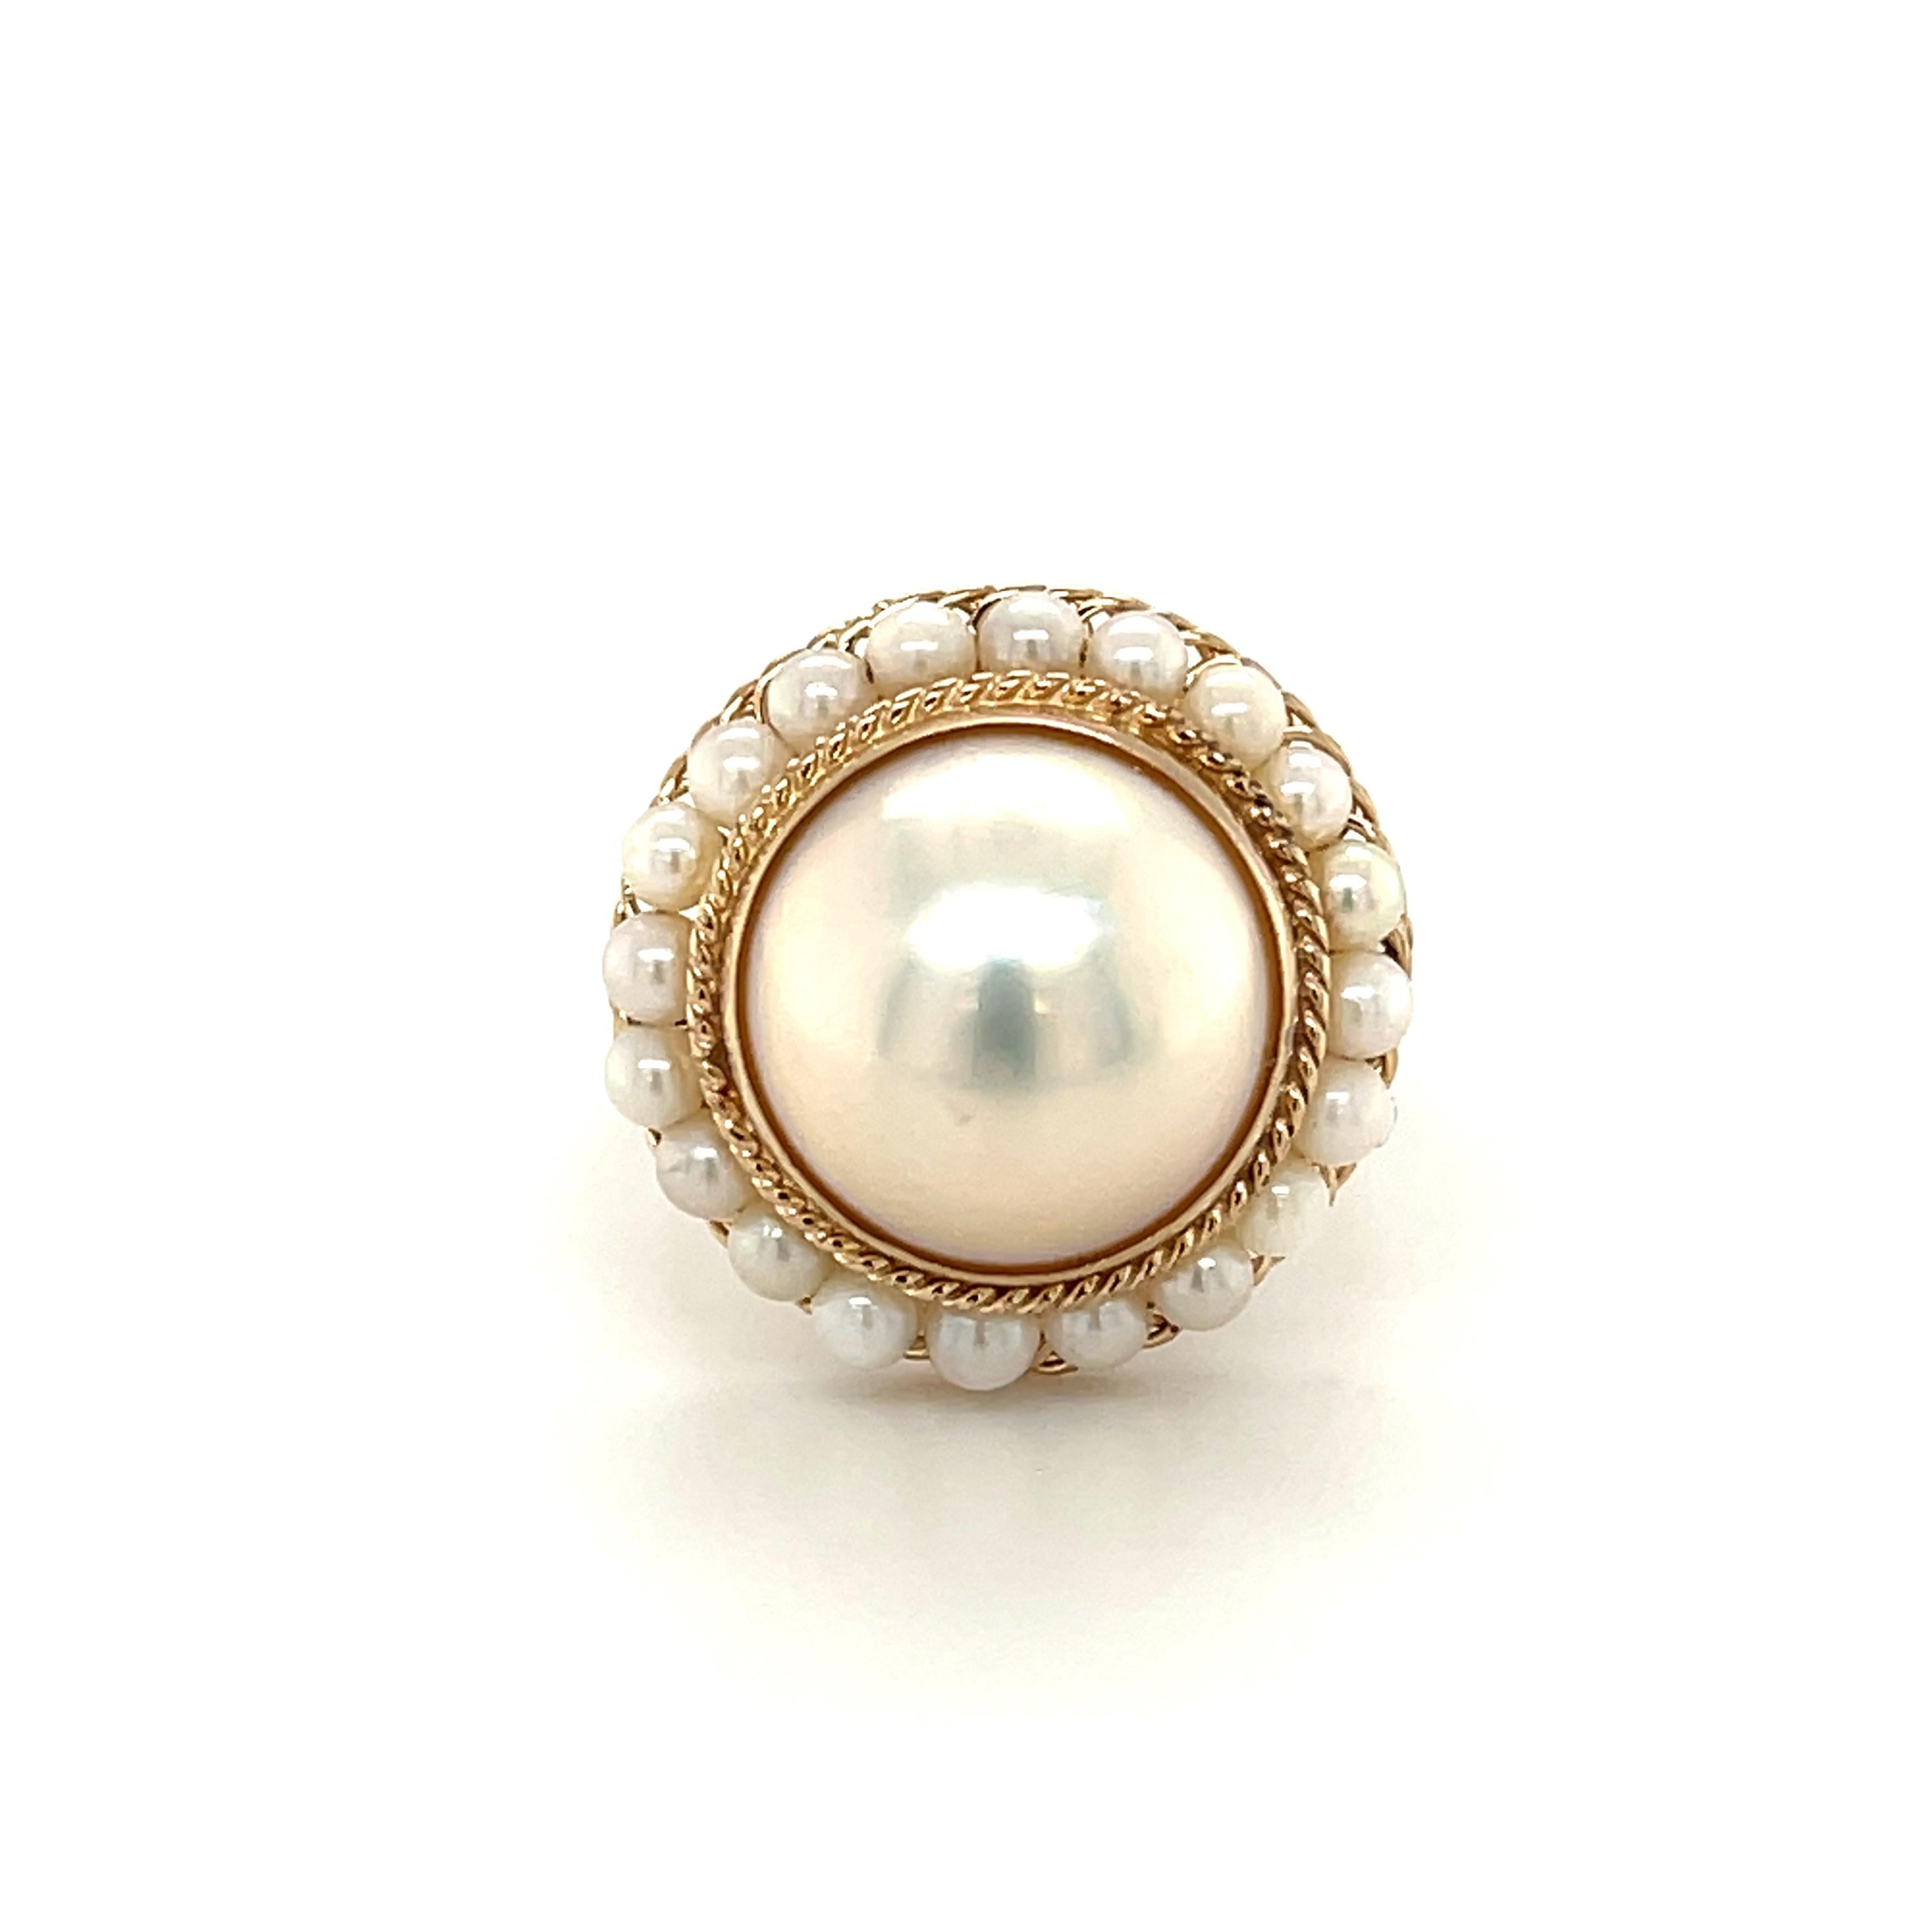 This timeless classic pearl ring features a gorgeous white Mabe pearl set in 14k yellow gold. The large center pearl measures 14mm, and is surrounded by delicate 3mm seed pearls. This ring showcases intricate hand made filigree gold work and fine